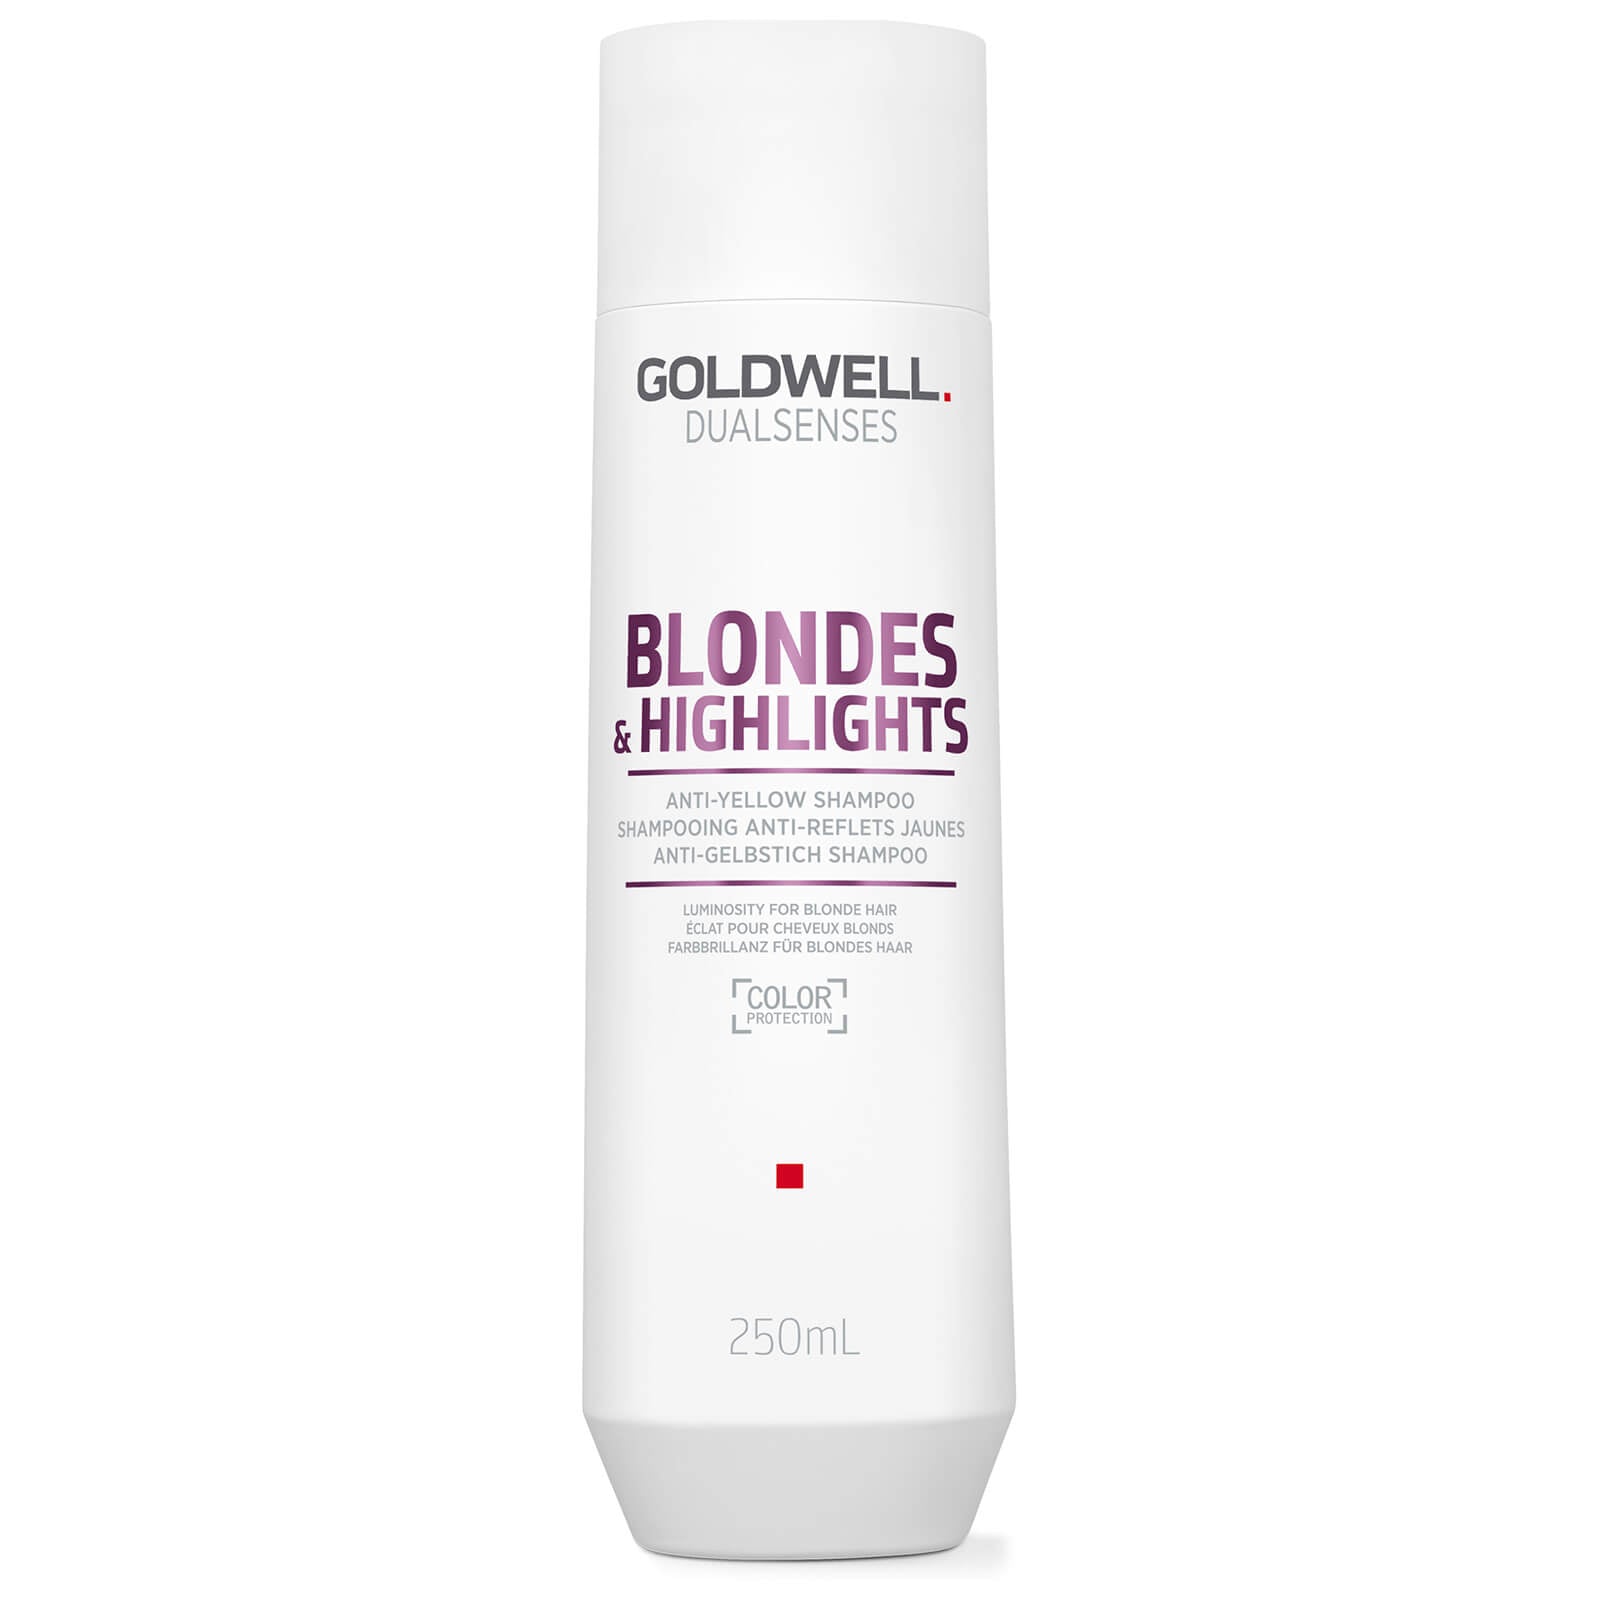 Goldwell DualSenses Blondes & Highlights Shampoo (250ml) - Ultimate Hair and Beauty